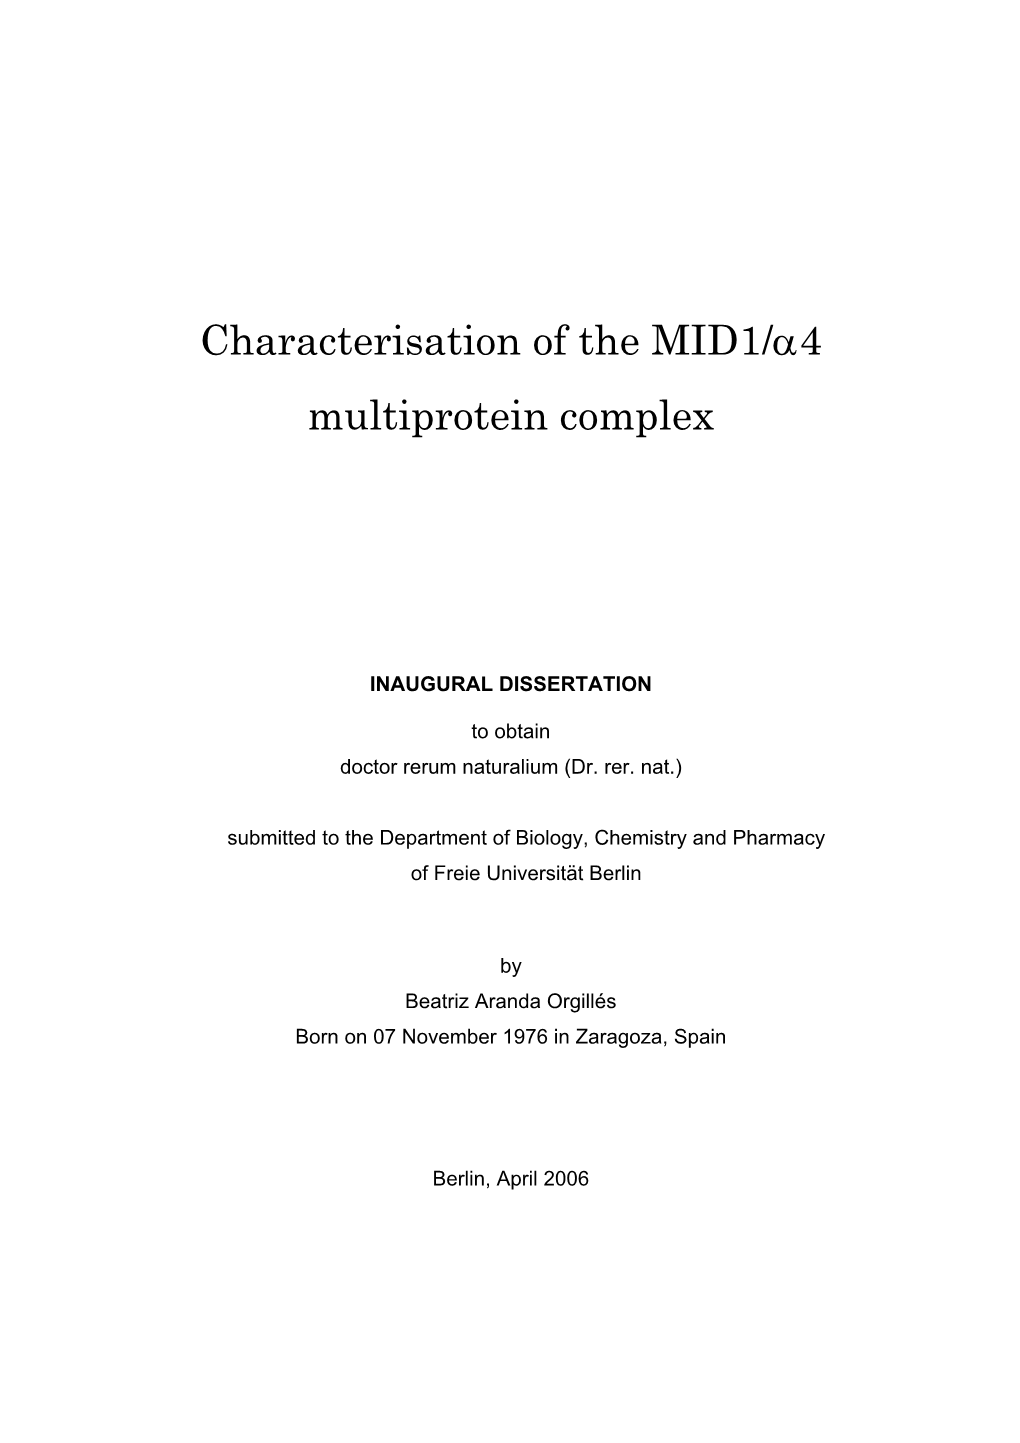 Characterisation of the MID1/Α4 Multiprotein Complex